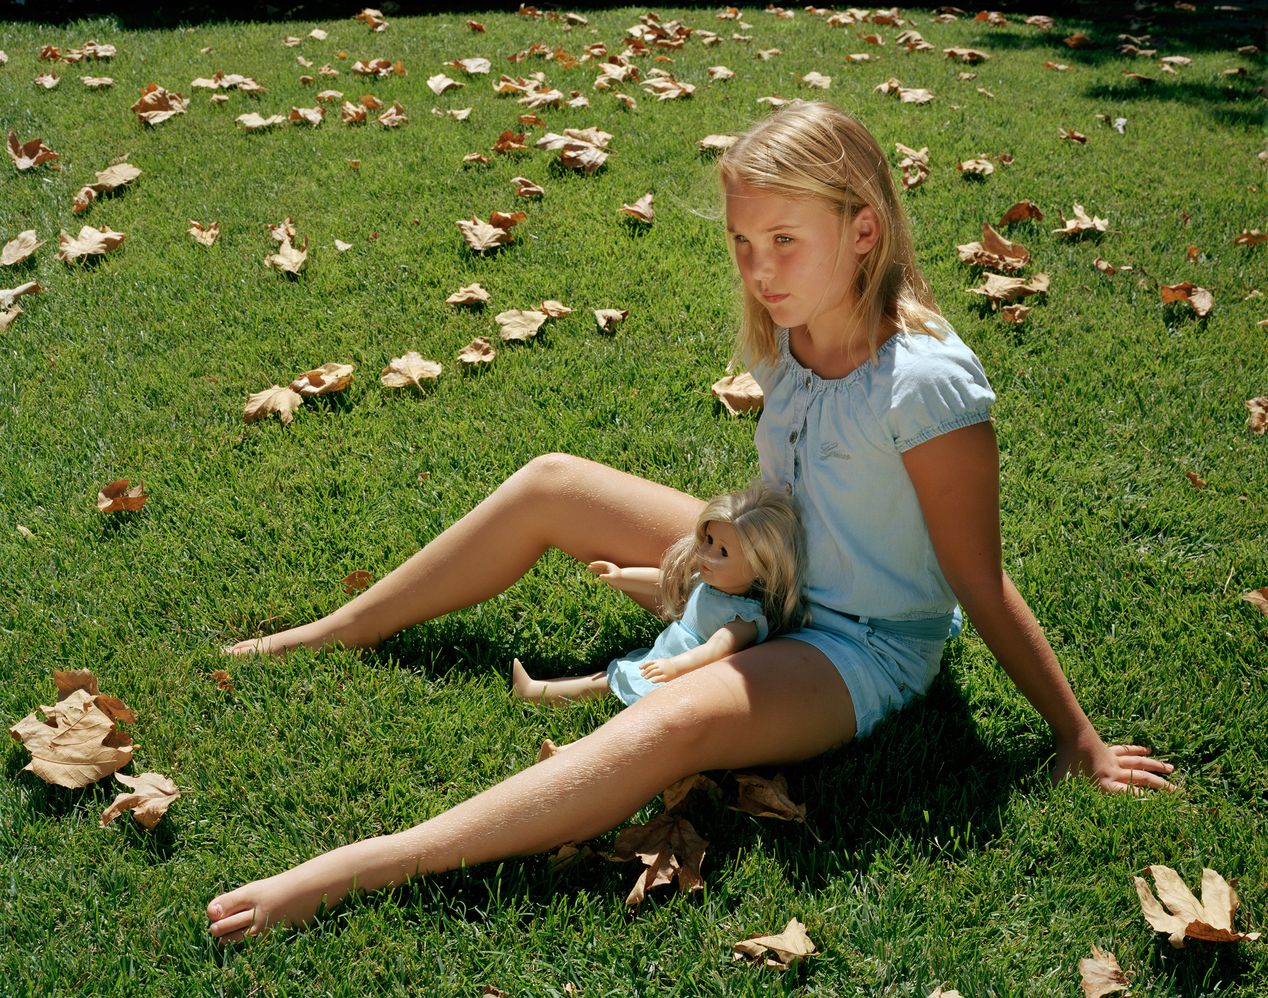 Young girls sitting on the grass with her lookalike doll, environmental portrait photography, Ilona Szwarc, contemporary Los Angeles artist.